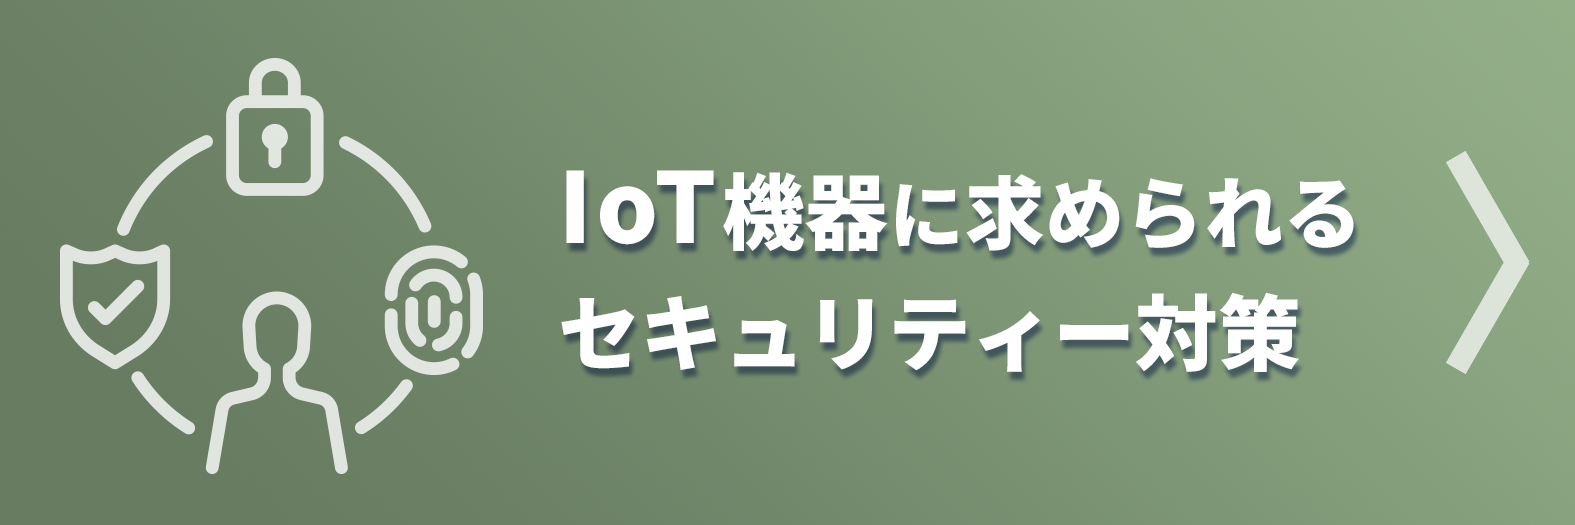 Security measures required for IoT devices